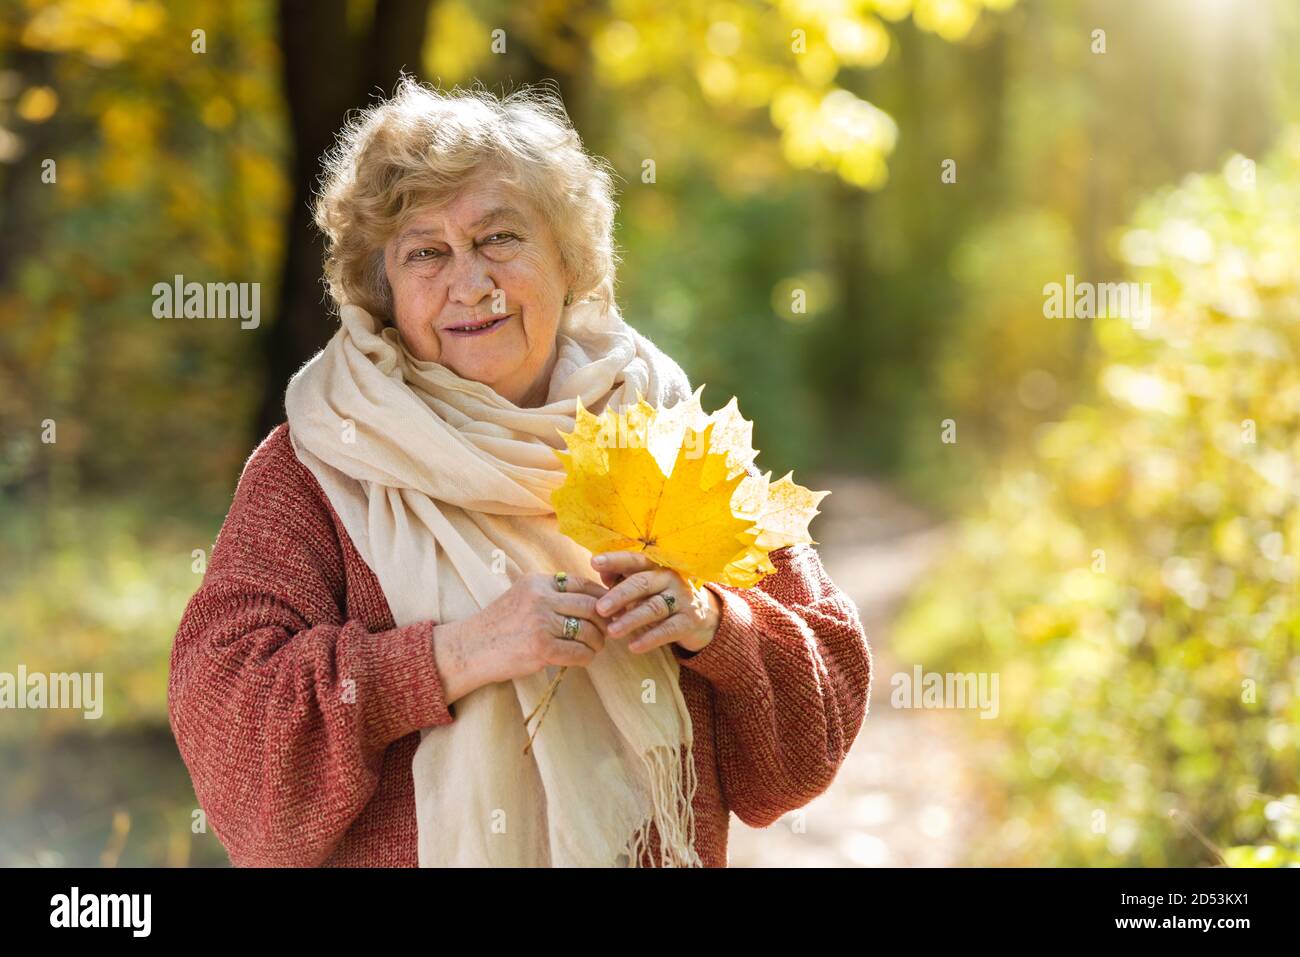 Gray-haired, smiling elderly woman in an autumn park. Happy old age, walking in nature, positive emotions. Stock Photo